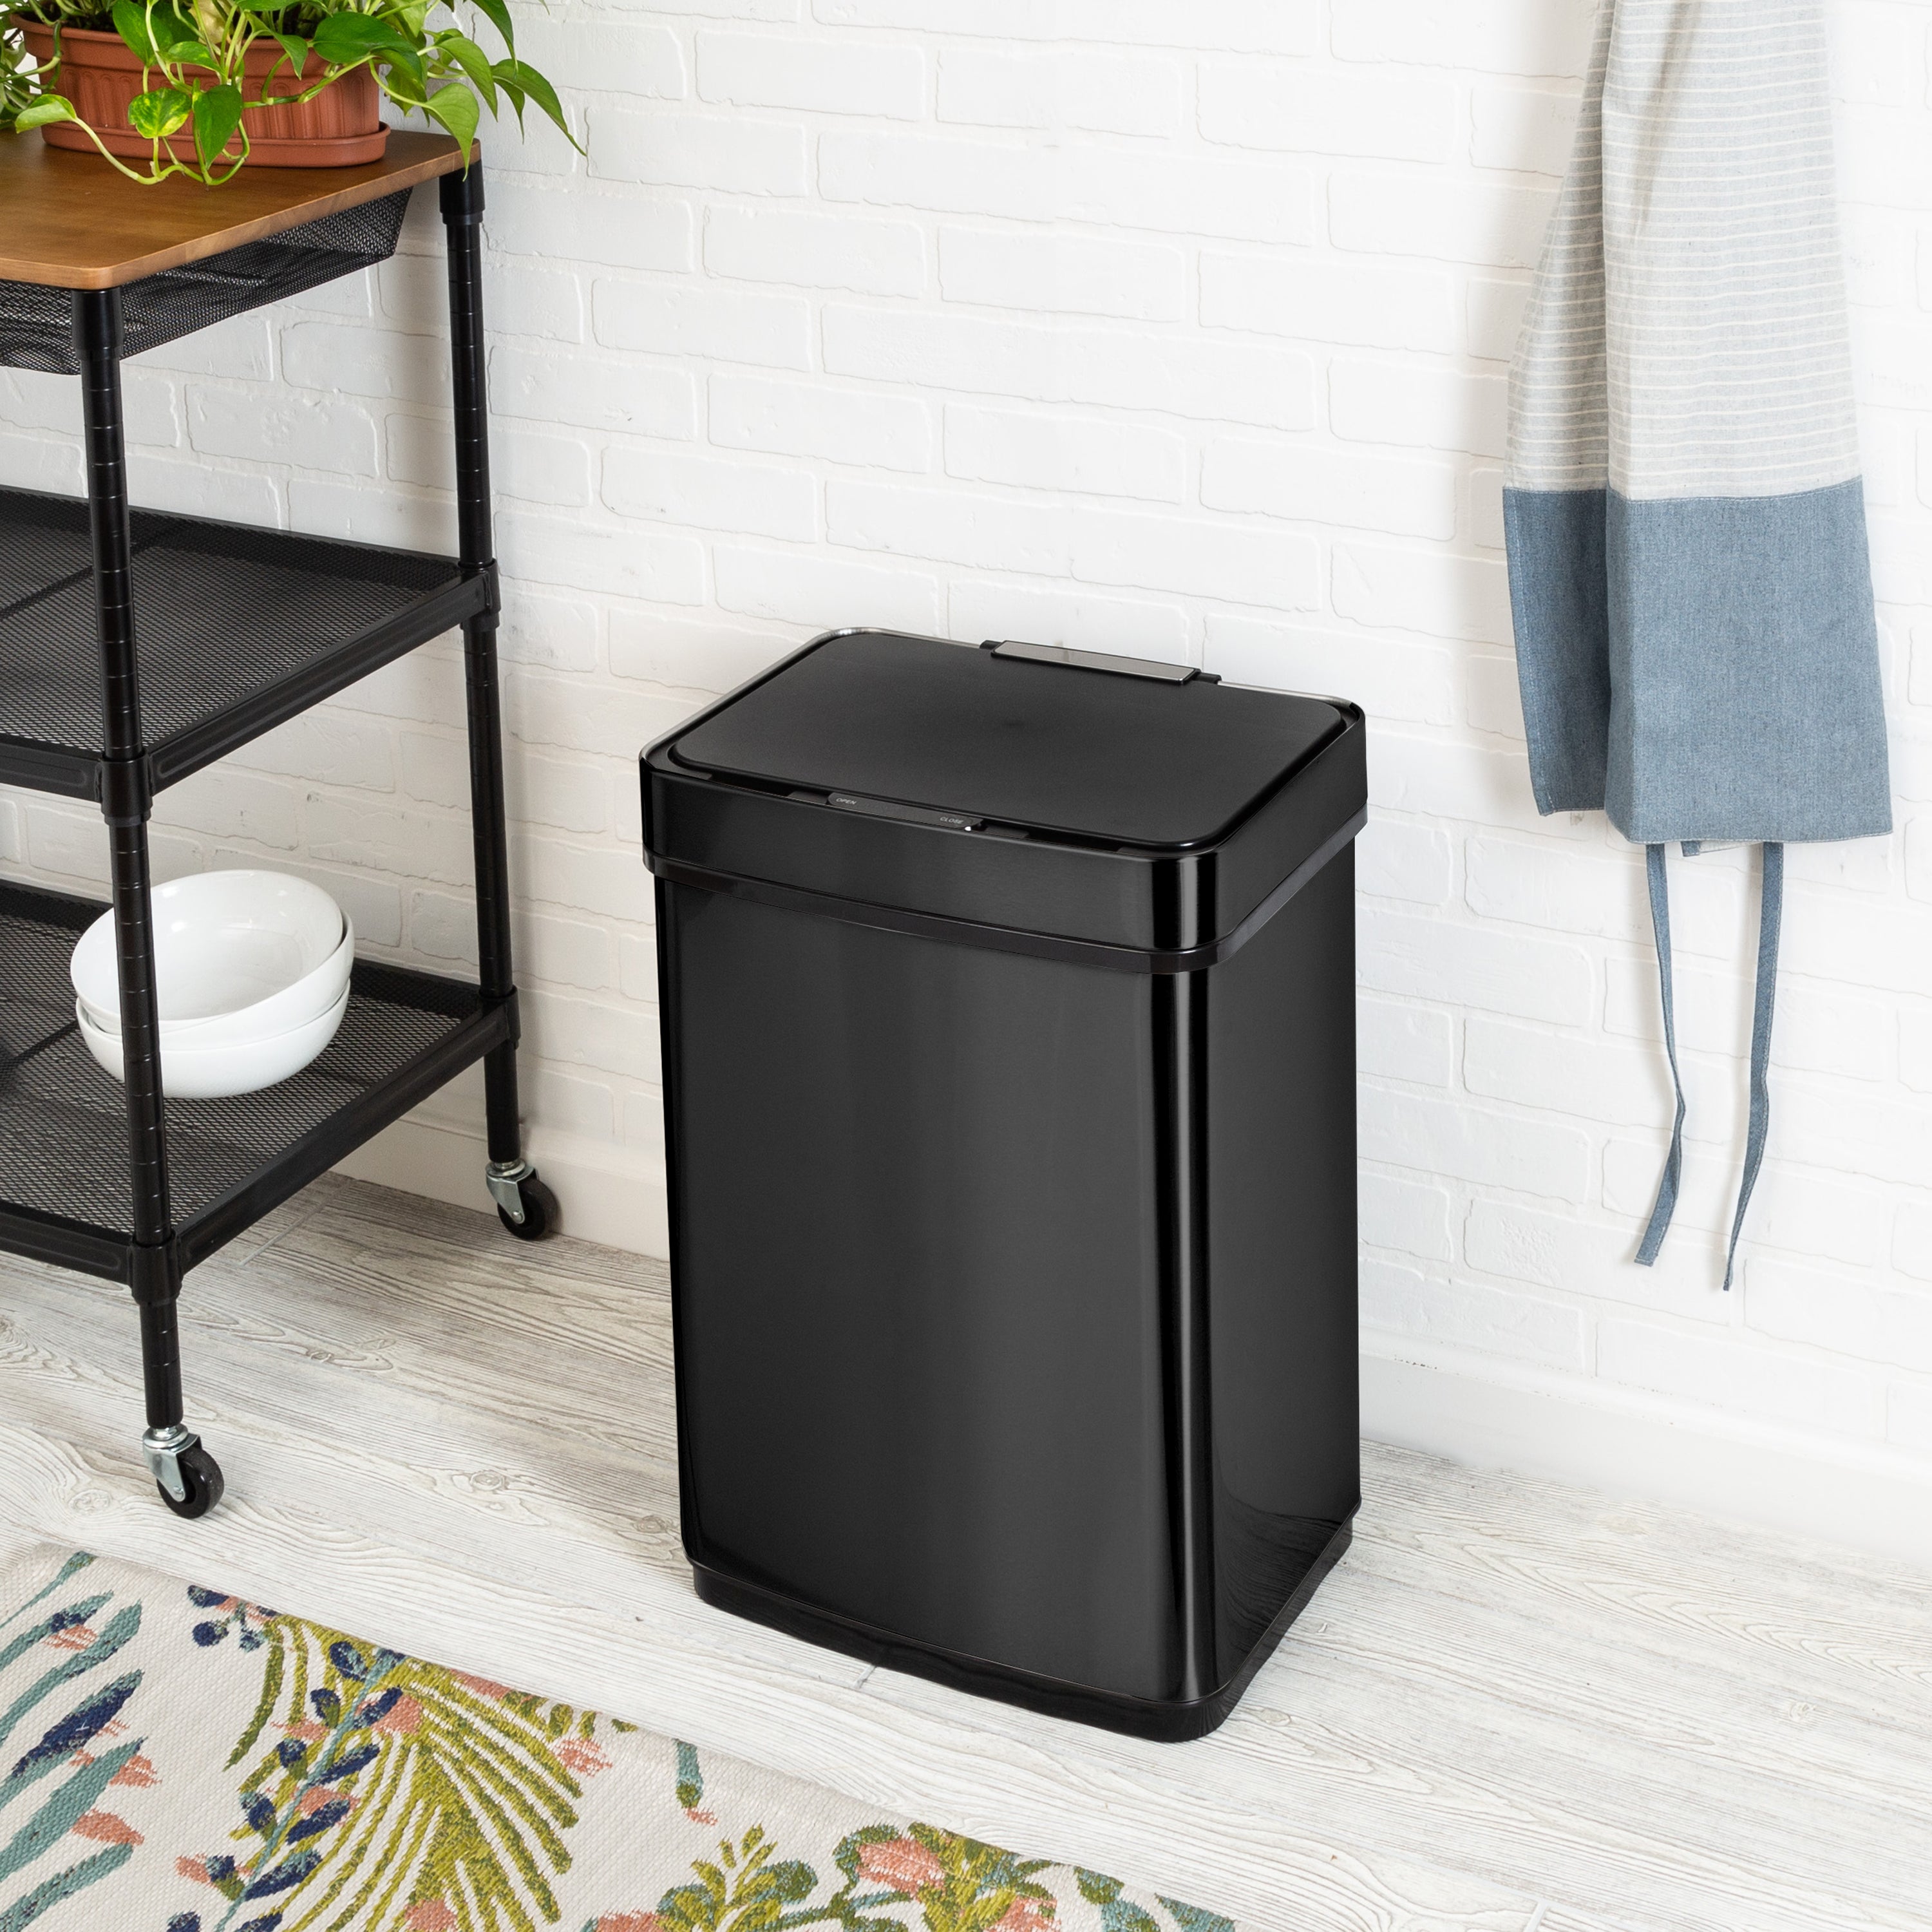 SIMPLI-MAGIC 50 Liter Soft-Close, Smudge Resistant Trash Can with Foot -  The Clean Store